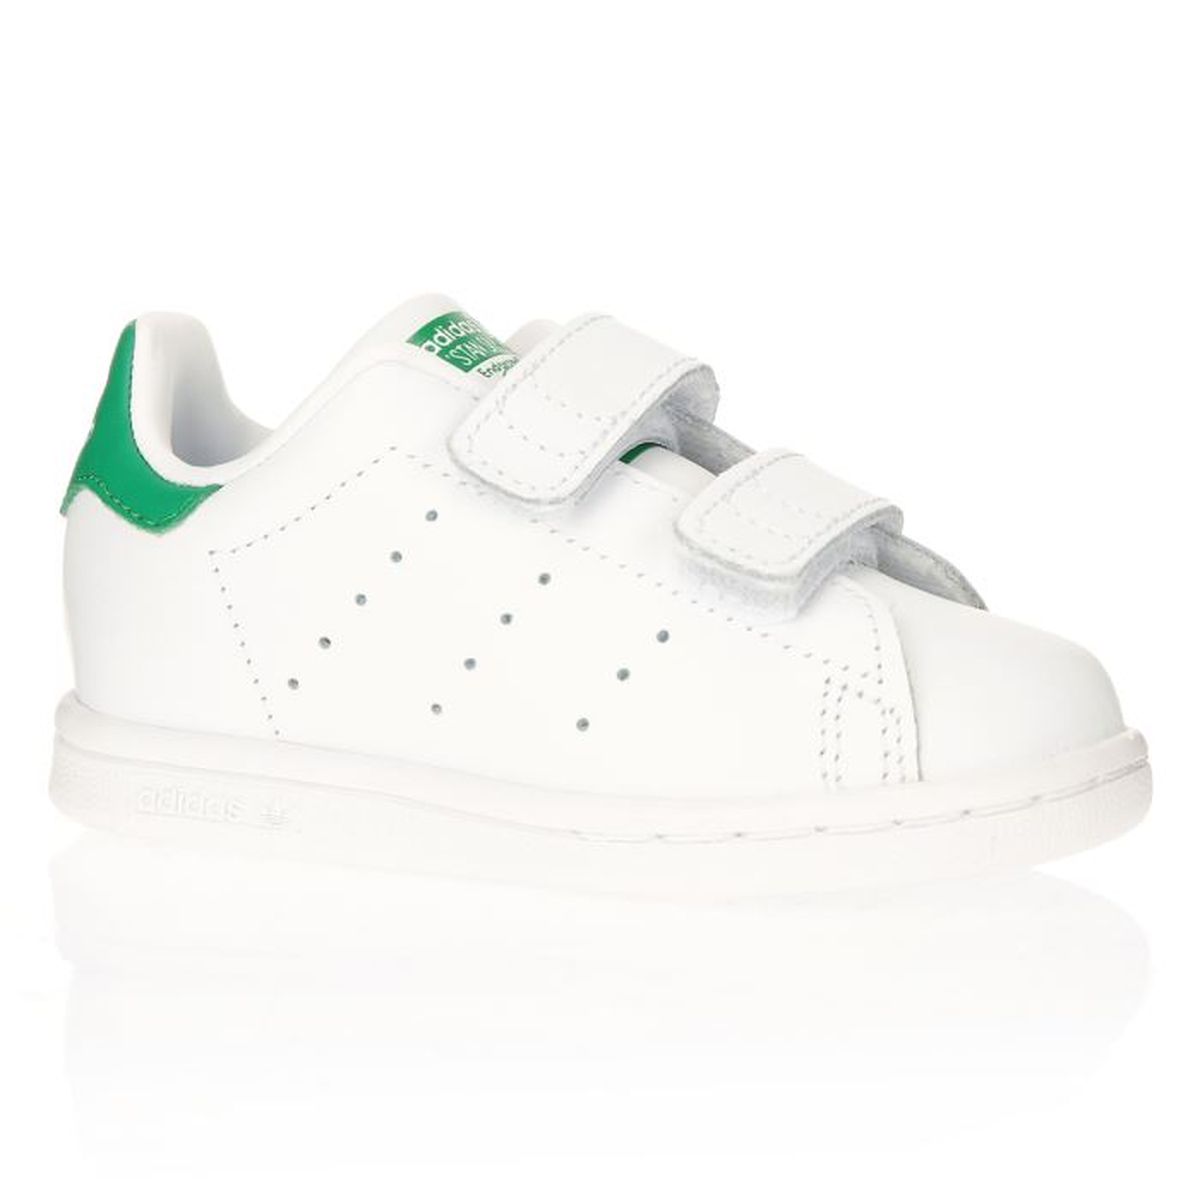 nike air force 1 femmes - adidas stan smith taille 24 Trouvez des prix imbattables